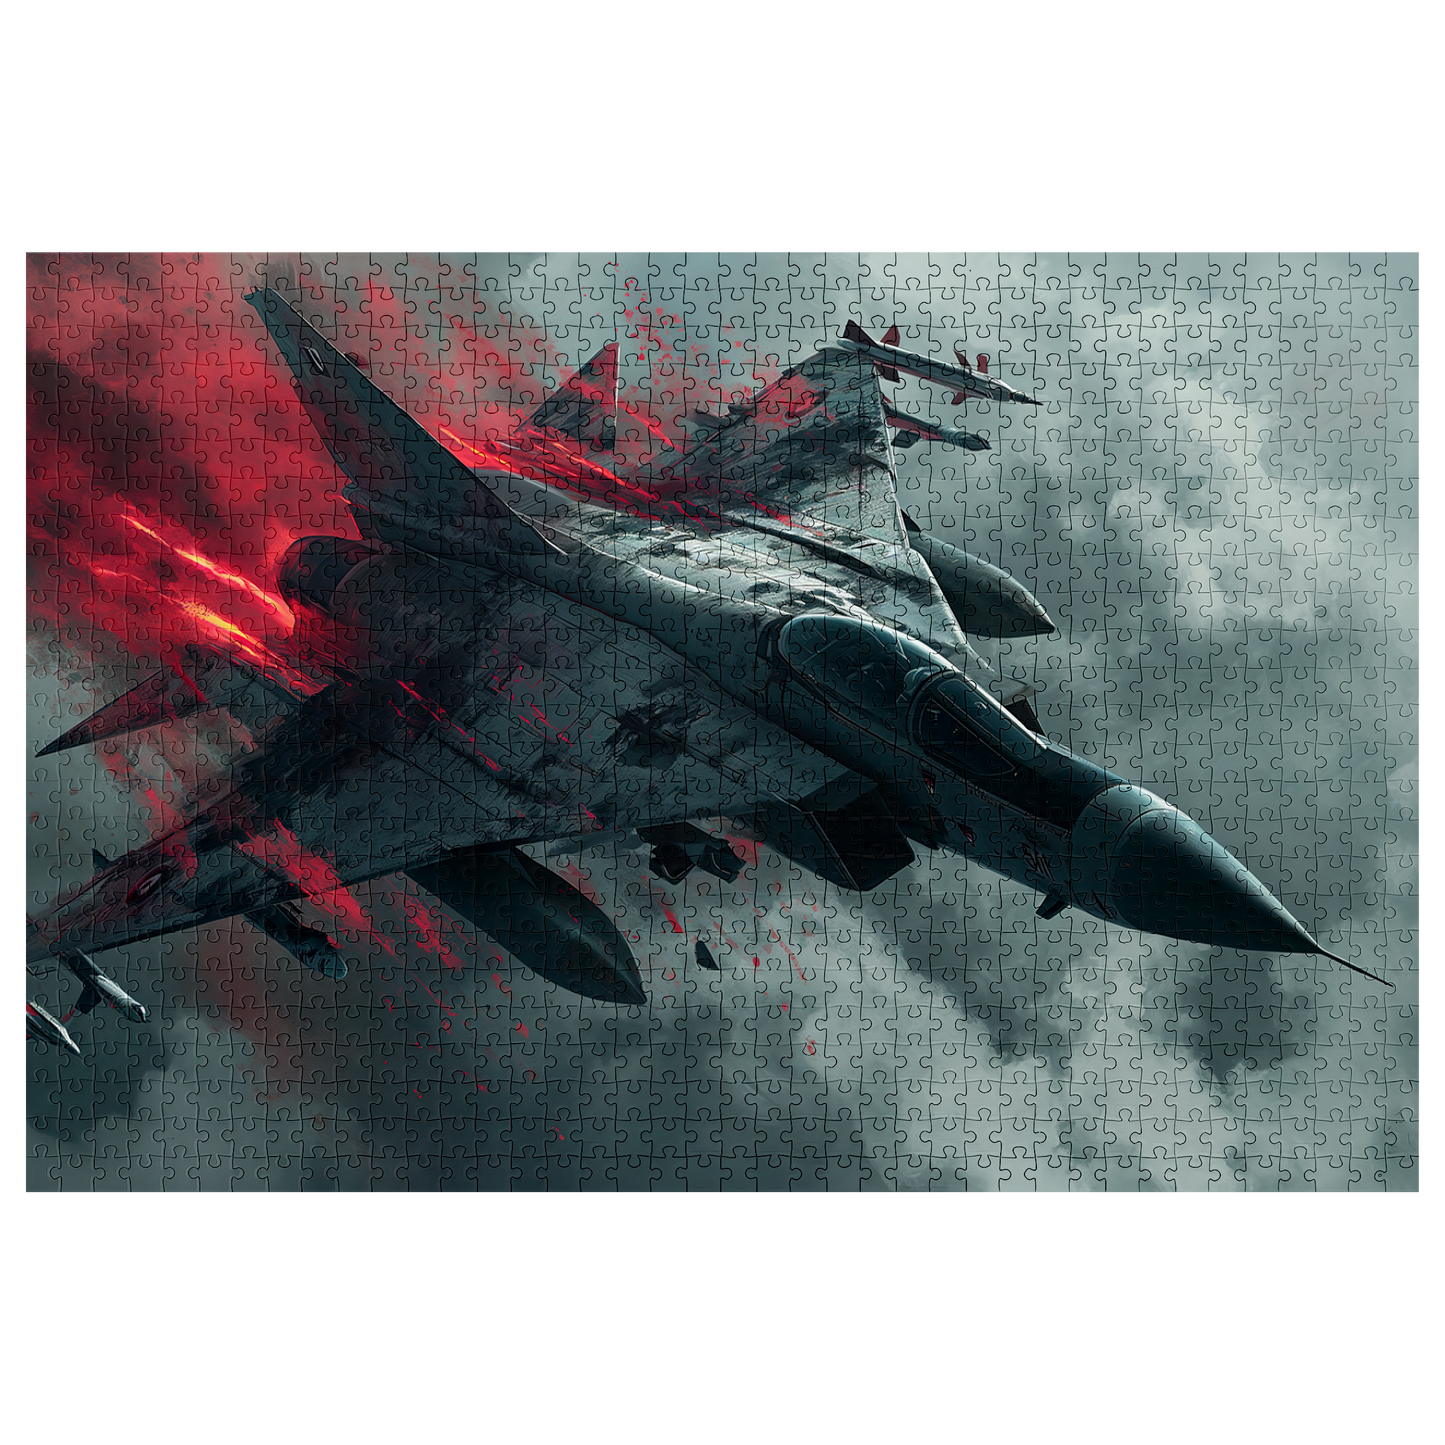 Aftermath - Premium Jigsaw Puzzle - Aerial Combat, Action Packed, Modern - Multiple Sizes Available